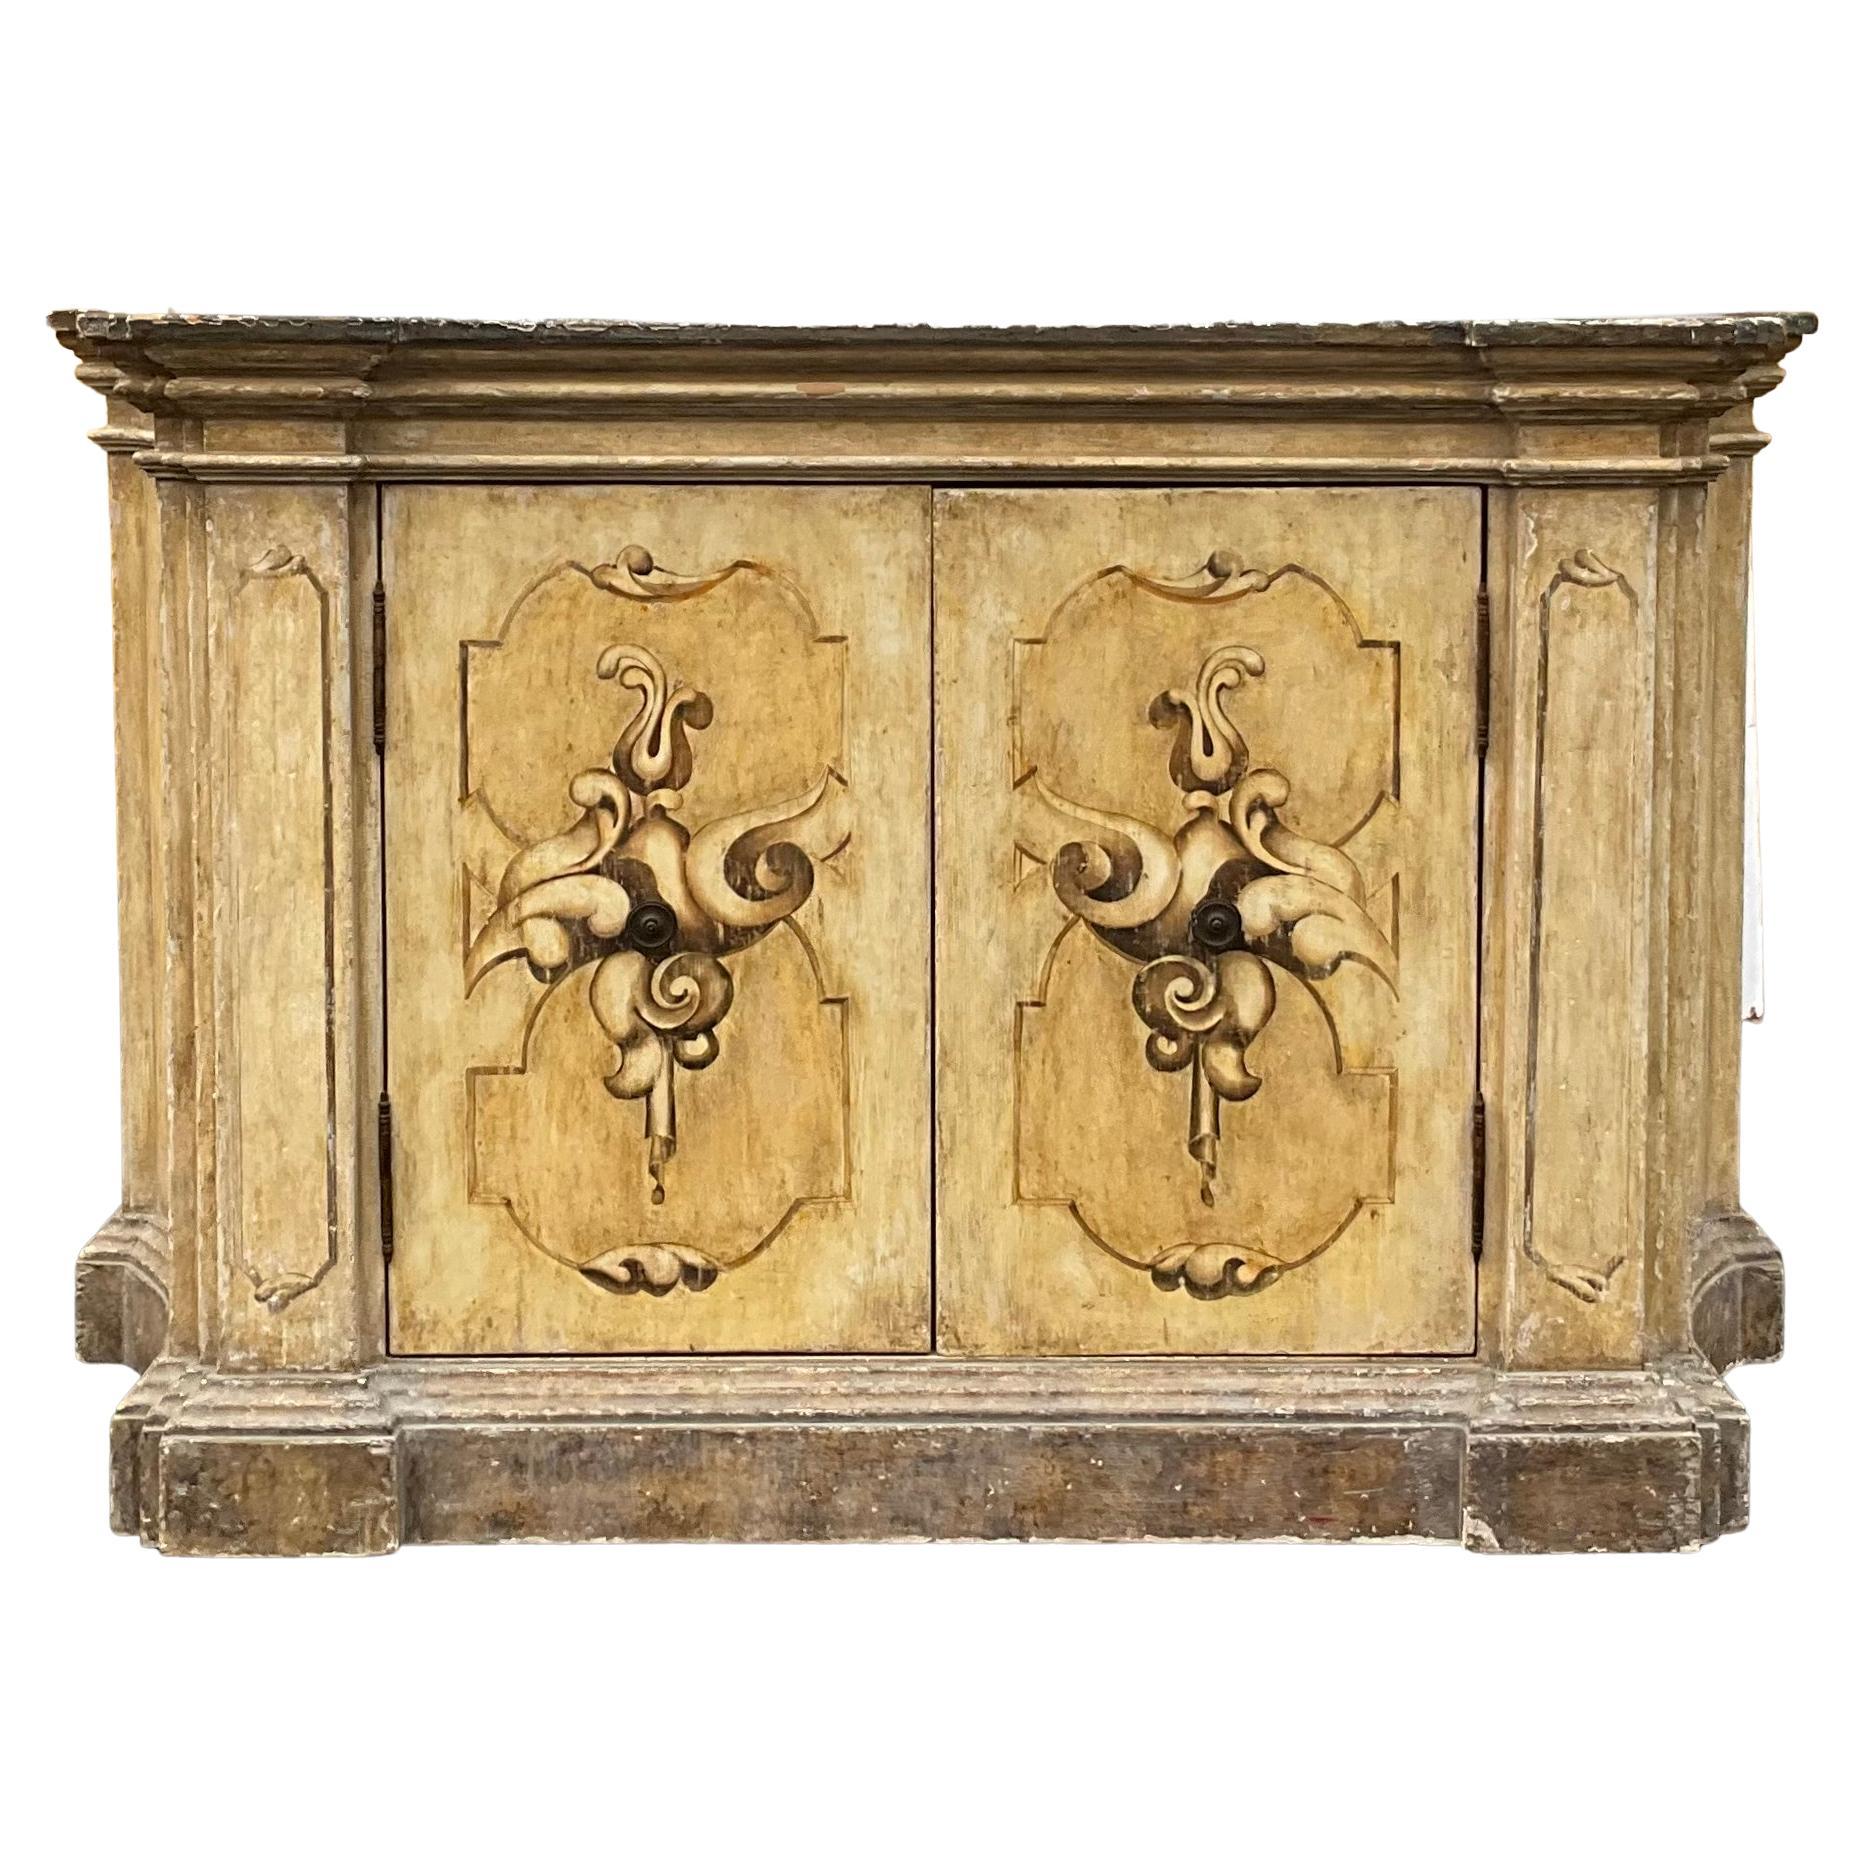 19th-C. French Style Hendrix Allardyce Painted Polychrome Cabinet / Credenza For Sale